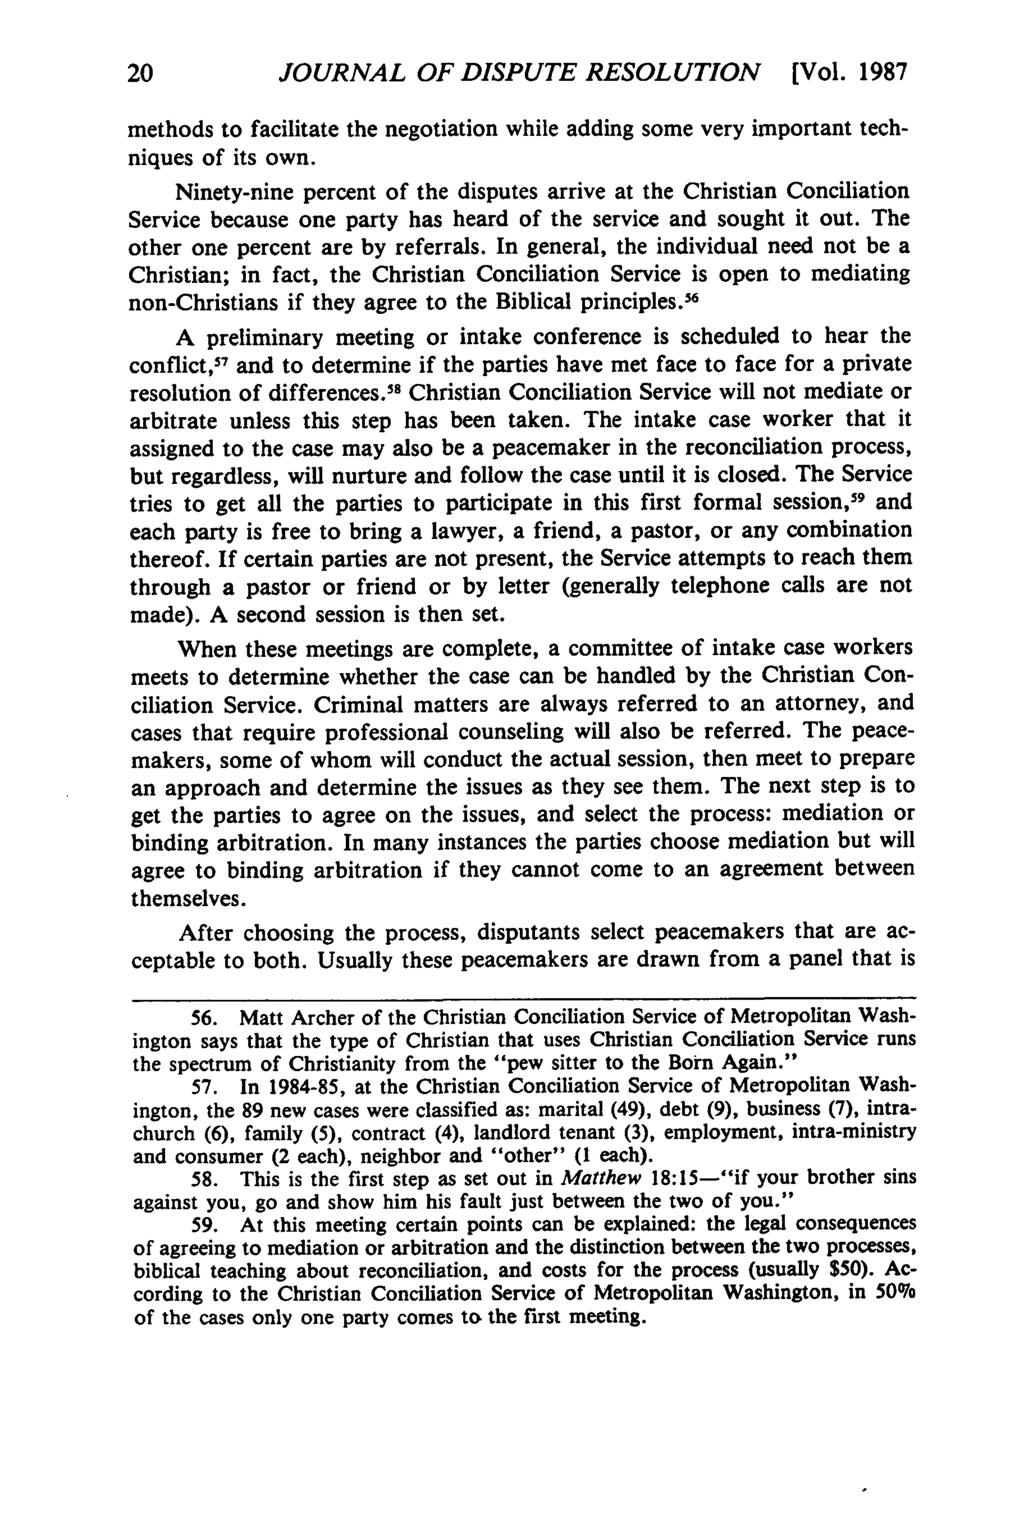 Journal of Dispute Resolution, Vol. 1987, Iss. [1987], Art. 4 JOURNAL OF DISPUTE RESOLUTION [Vol. 1987 methods to facilitate the negotiation while adding some very important techniques of its own.